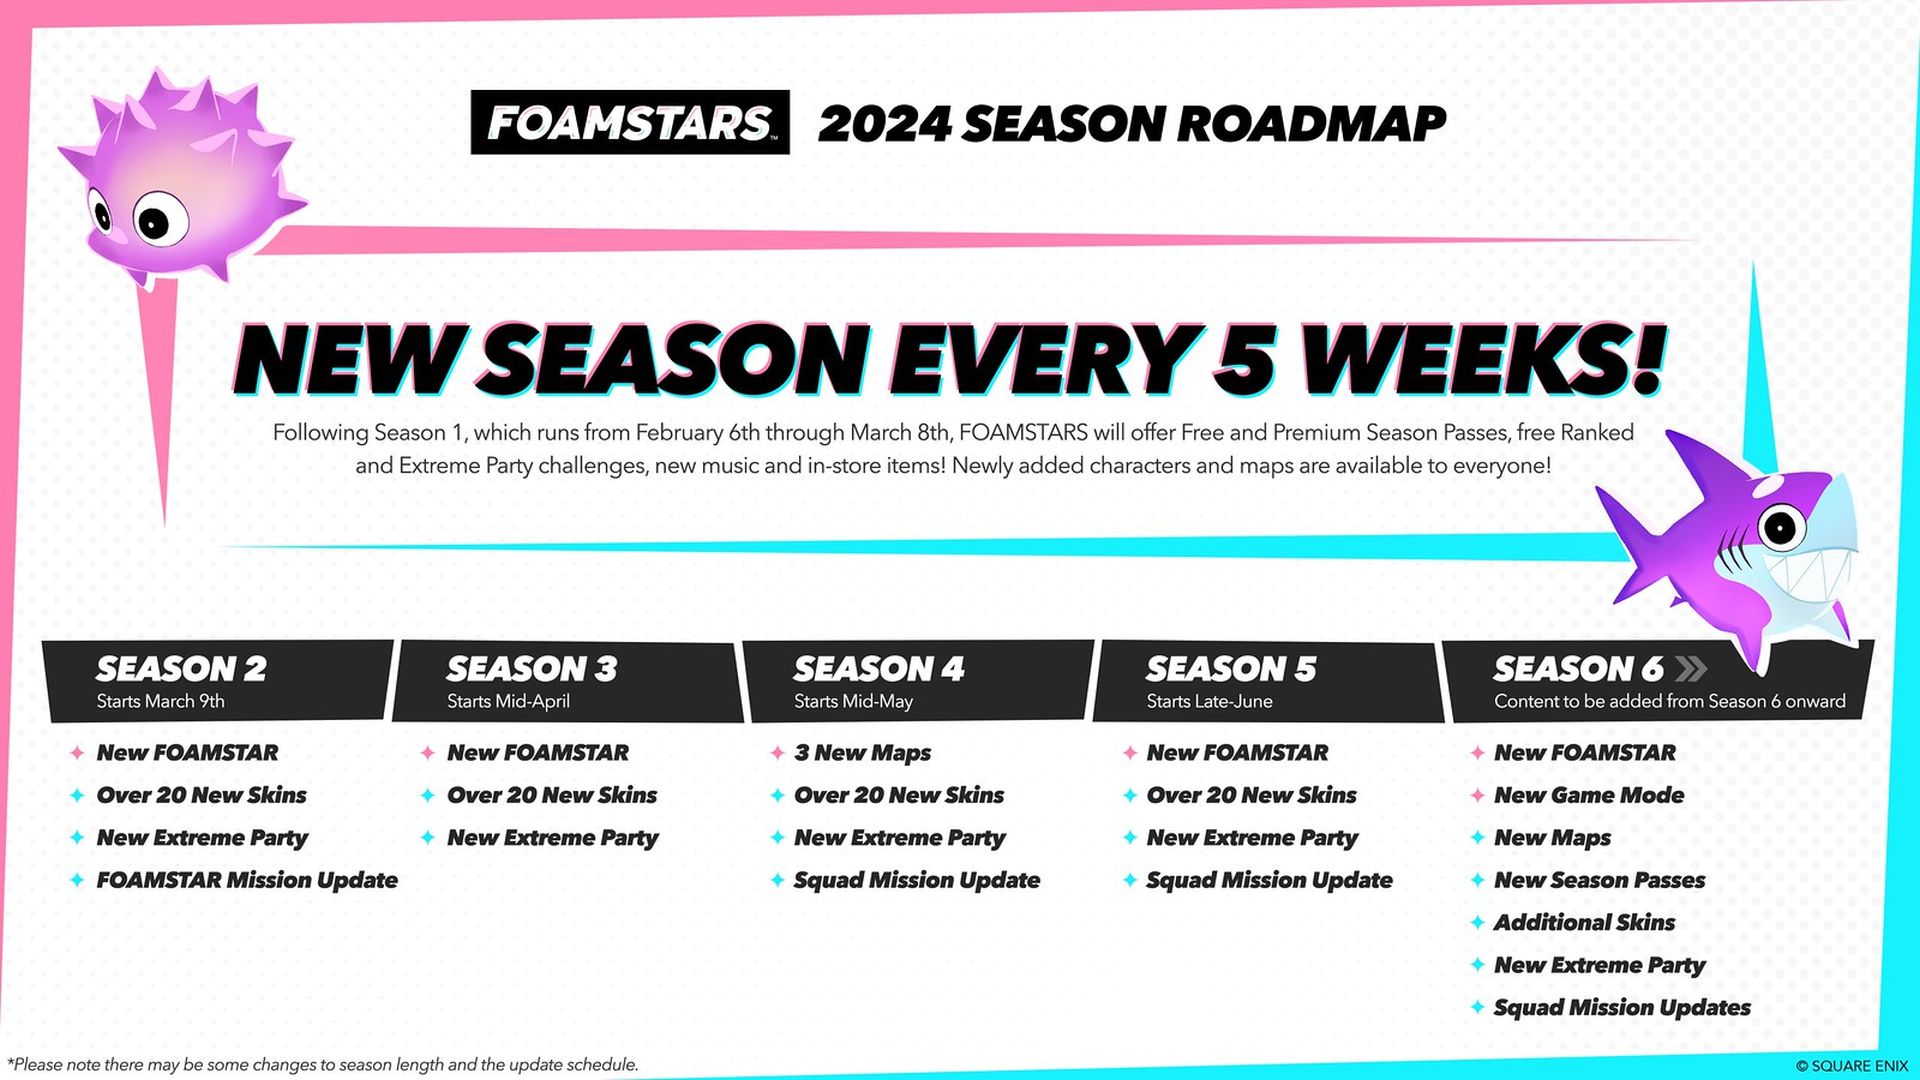 Foamstars Post-Launch Roadmap Revealed, Includes New Skins, Characters and More